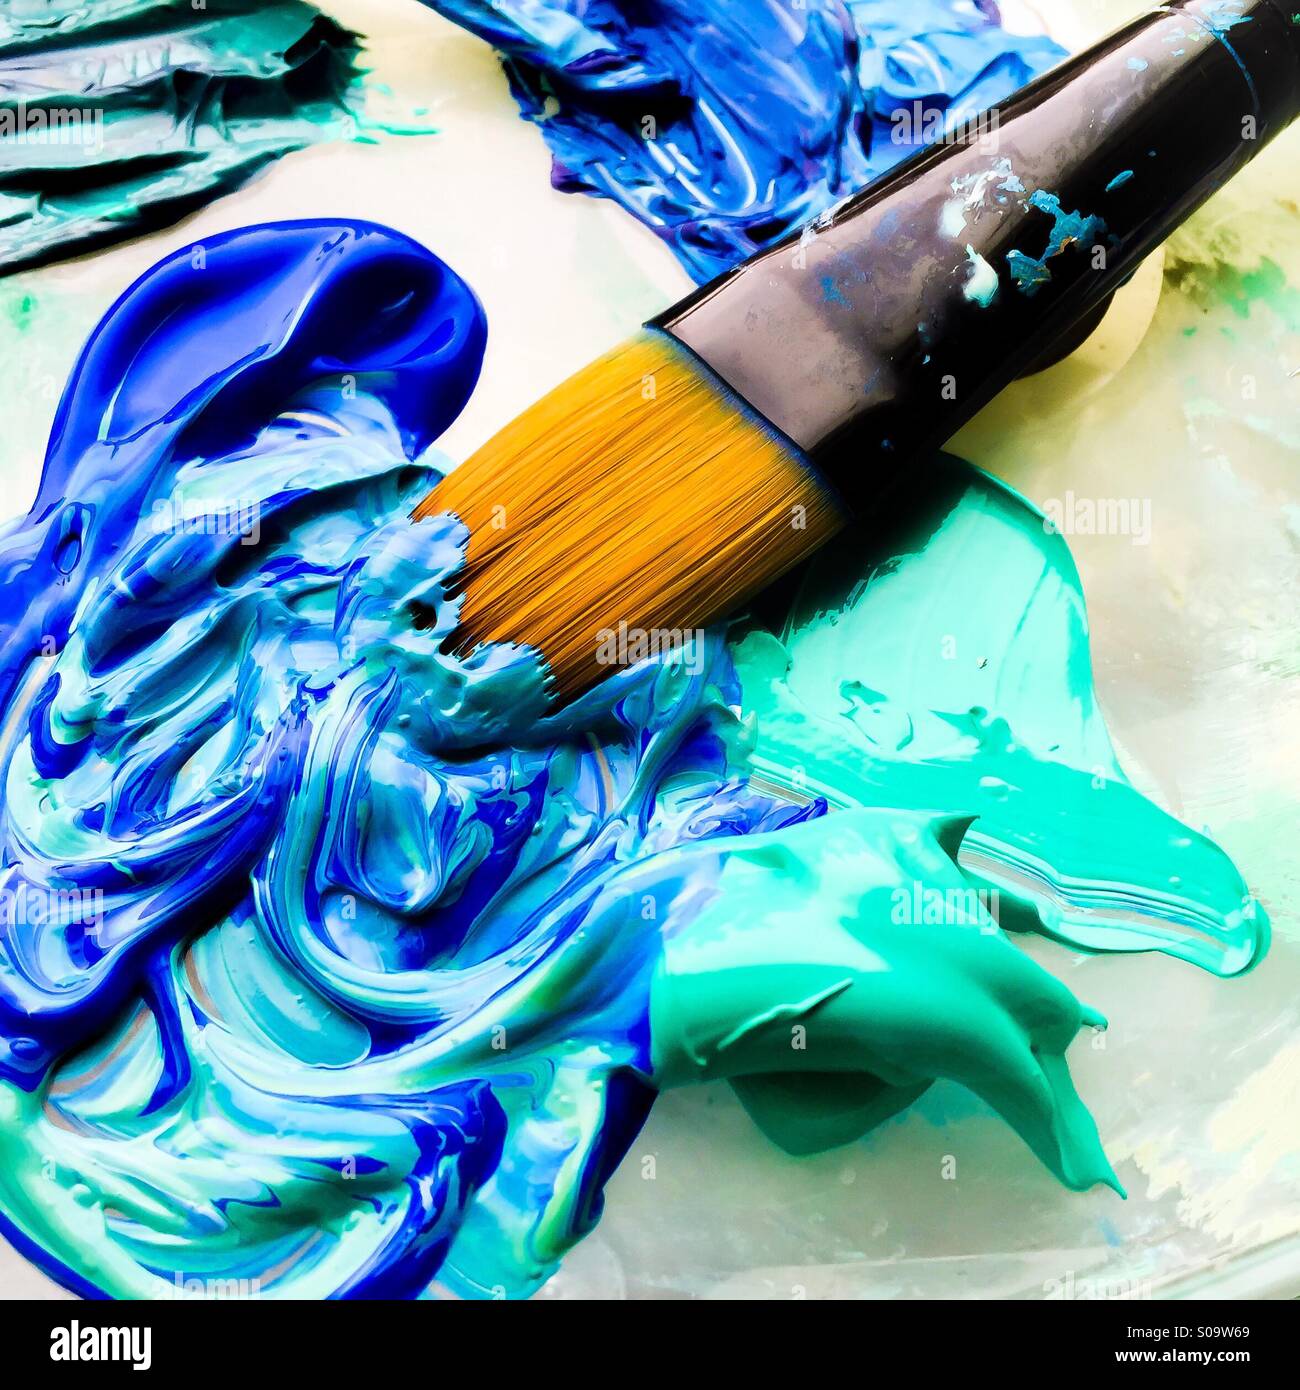 Paintbrush in blue and turquoise paint. Stock Photo